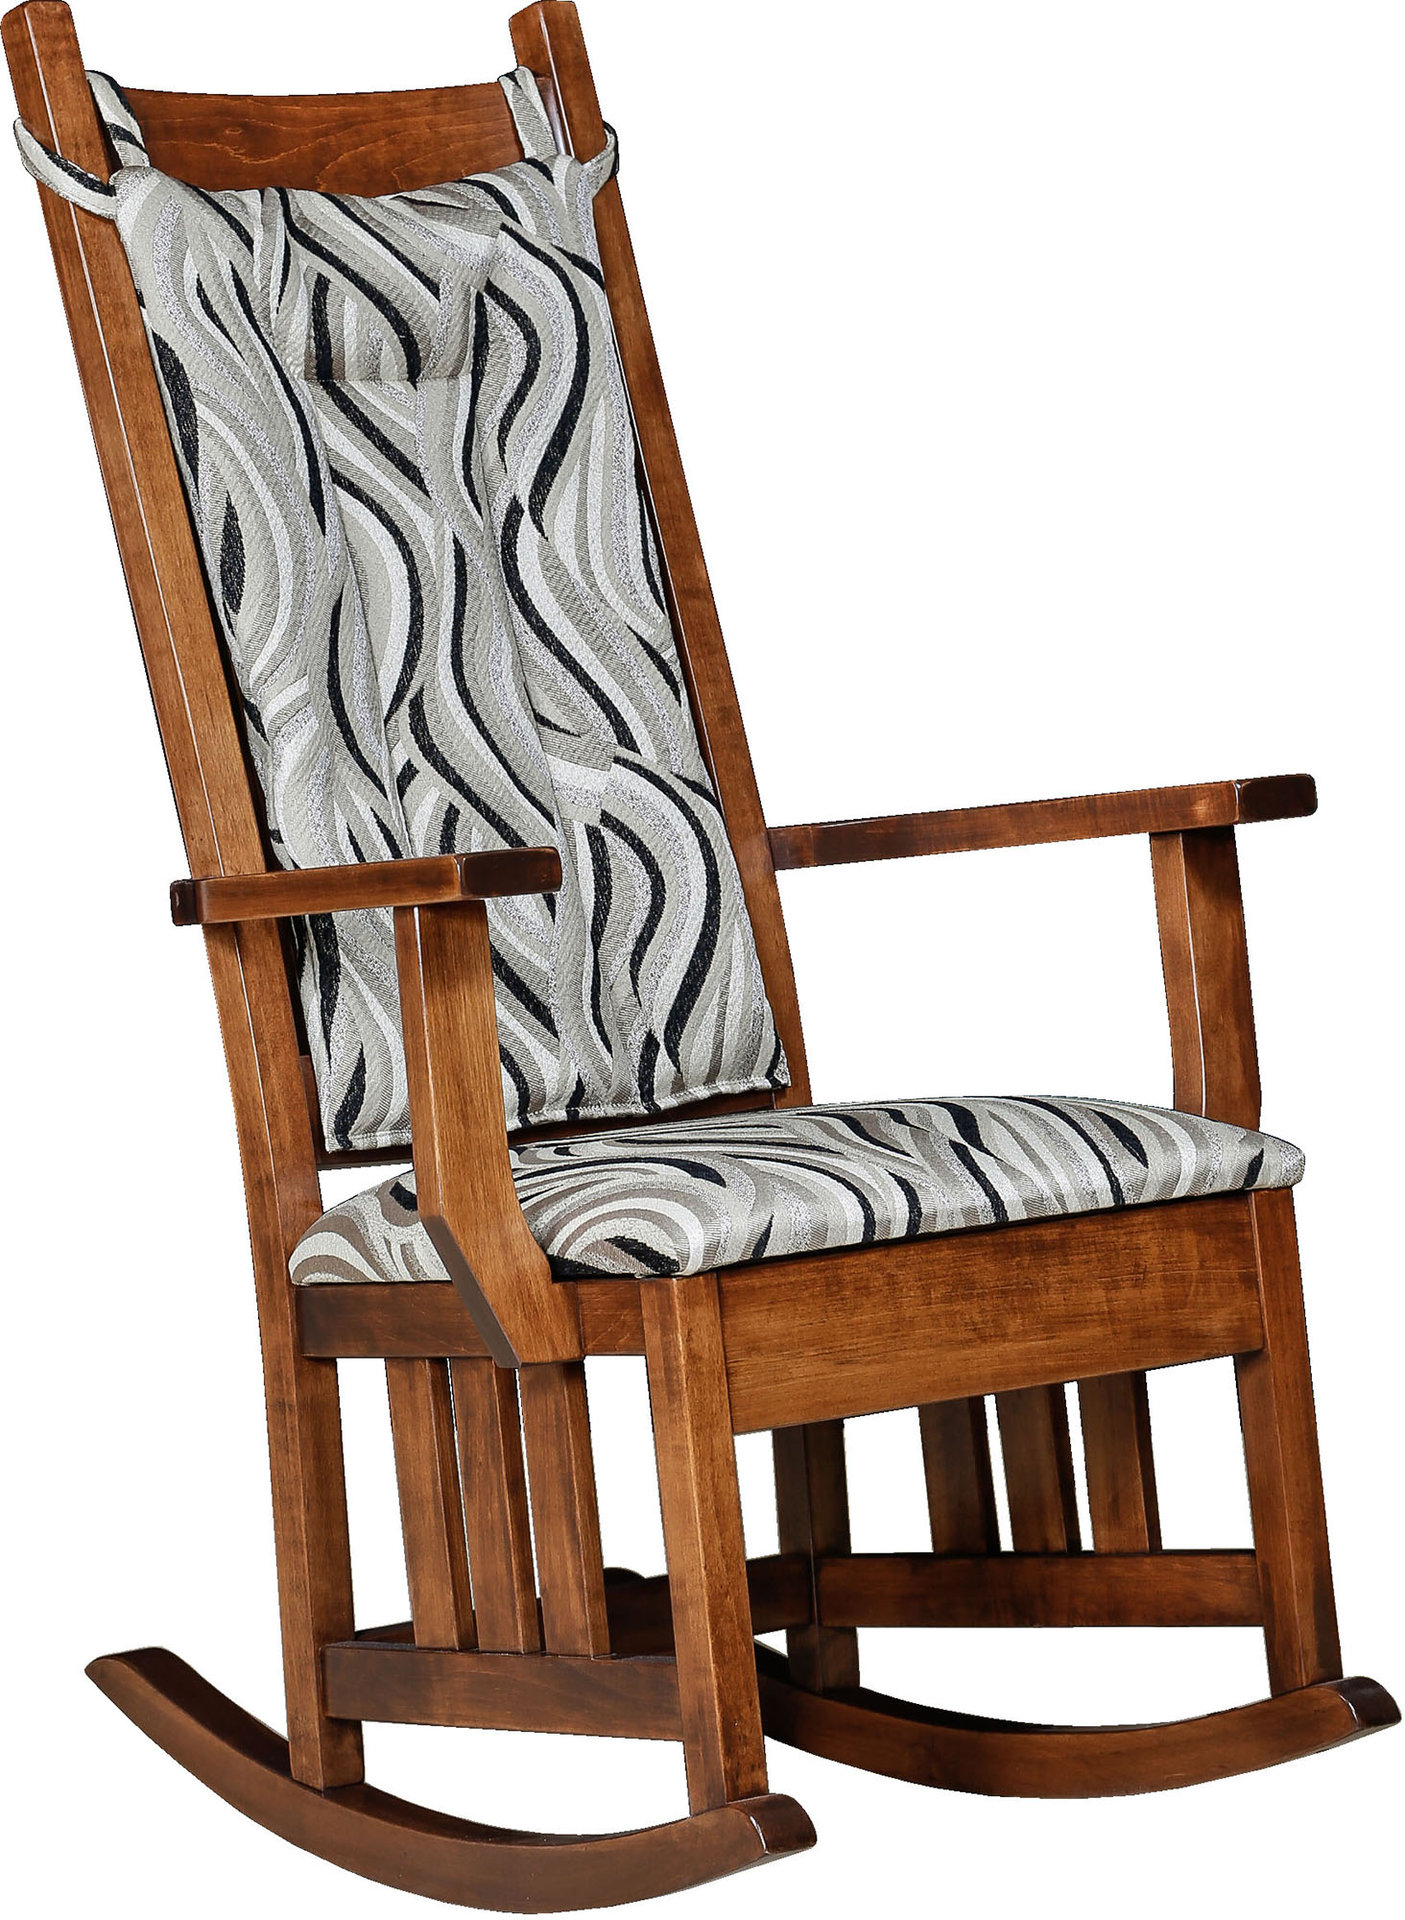 Solid-Wood Rocking Chairs